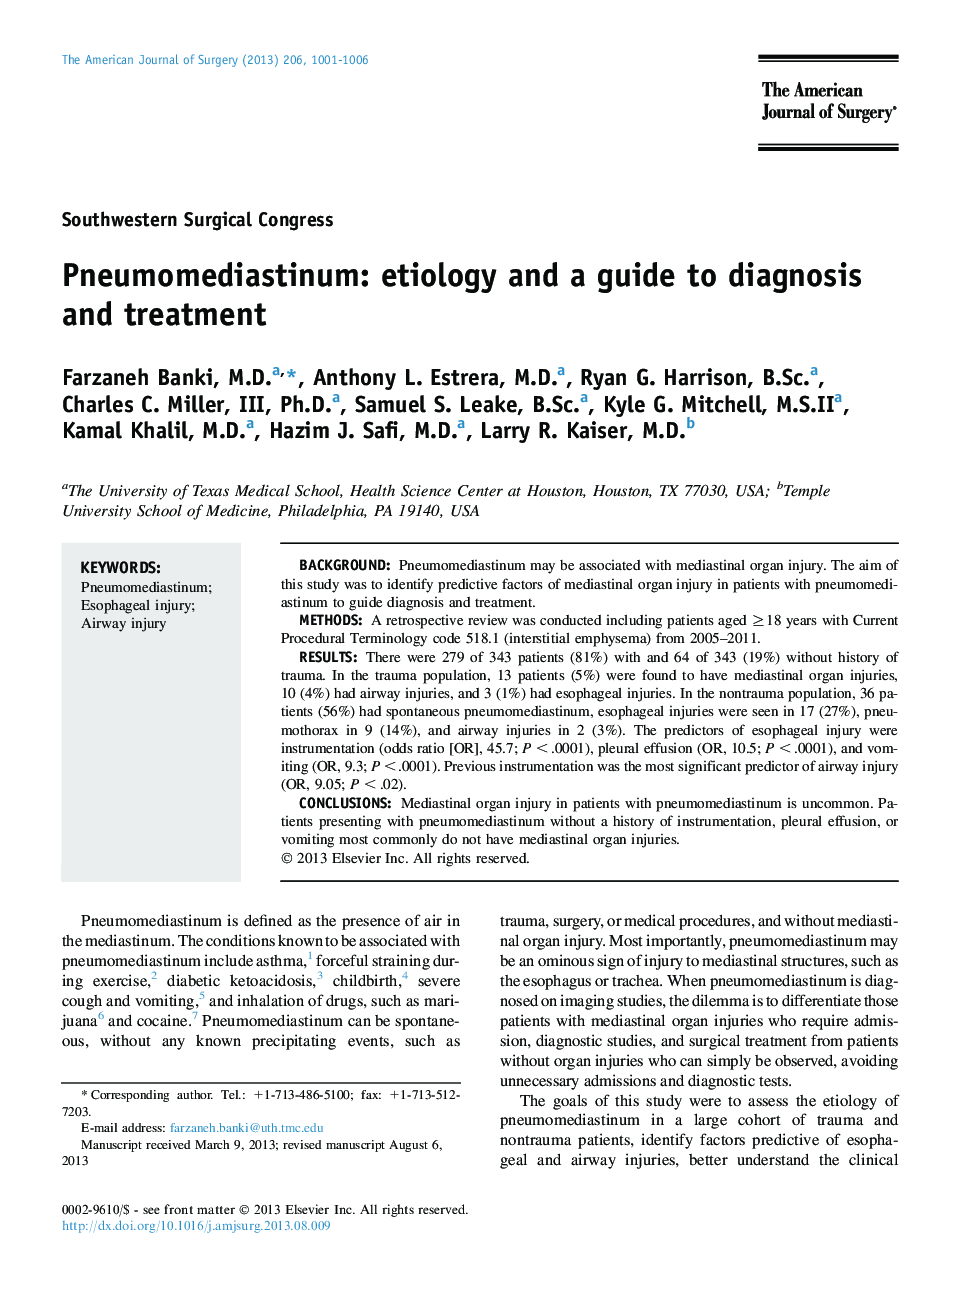 Pneumomediastinum: etiology and a guide to diagnosis and treatment